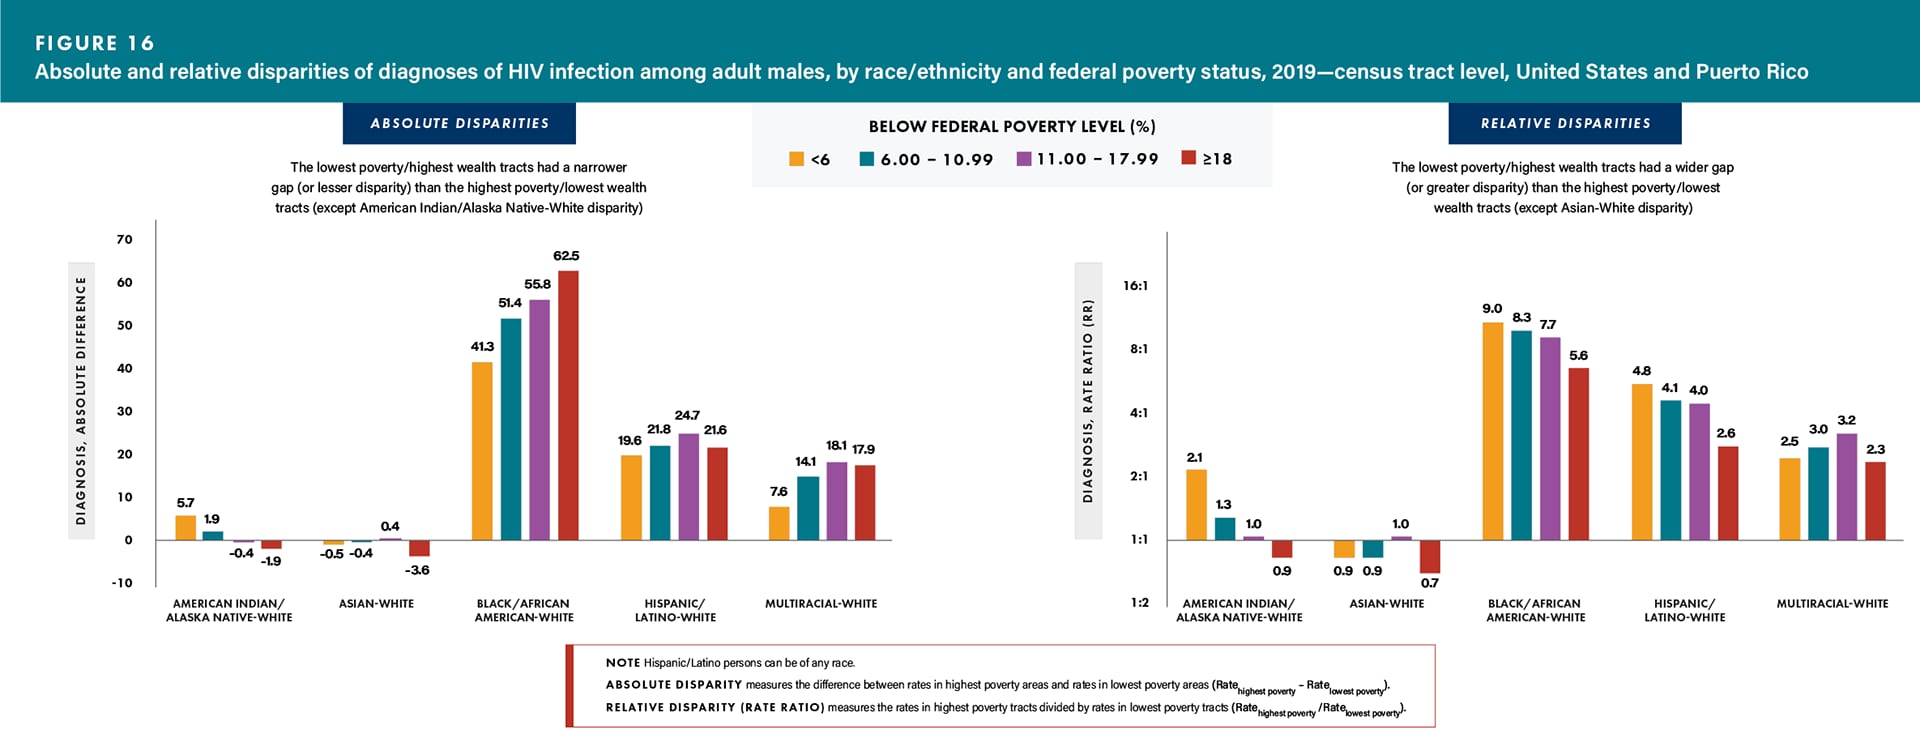 For absolute disparities, the lowest poverty/highest wealth tracts had a narrower gap (or lesser disparity) than the highest poverty/lowest wealth tracts (except American Indian/Alaskan Native-White disparity). For relative disparities, the lowest poverty/highest wealth tracts had a wider gap (or greater disparity) than the highest poverty/lowest wealth tracts (except Asian-White disparity).